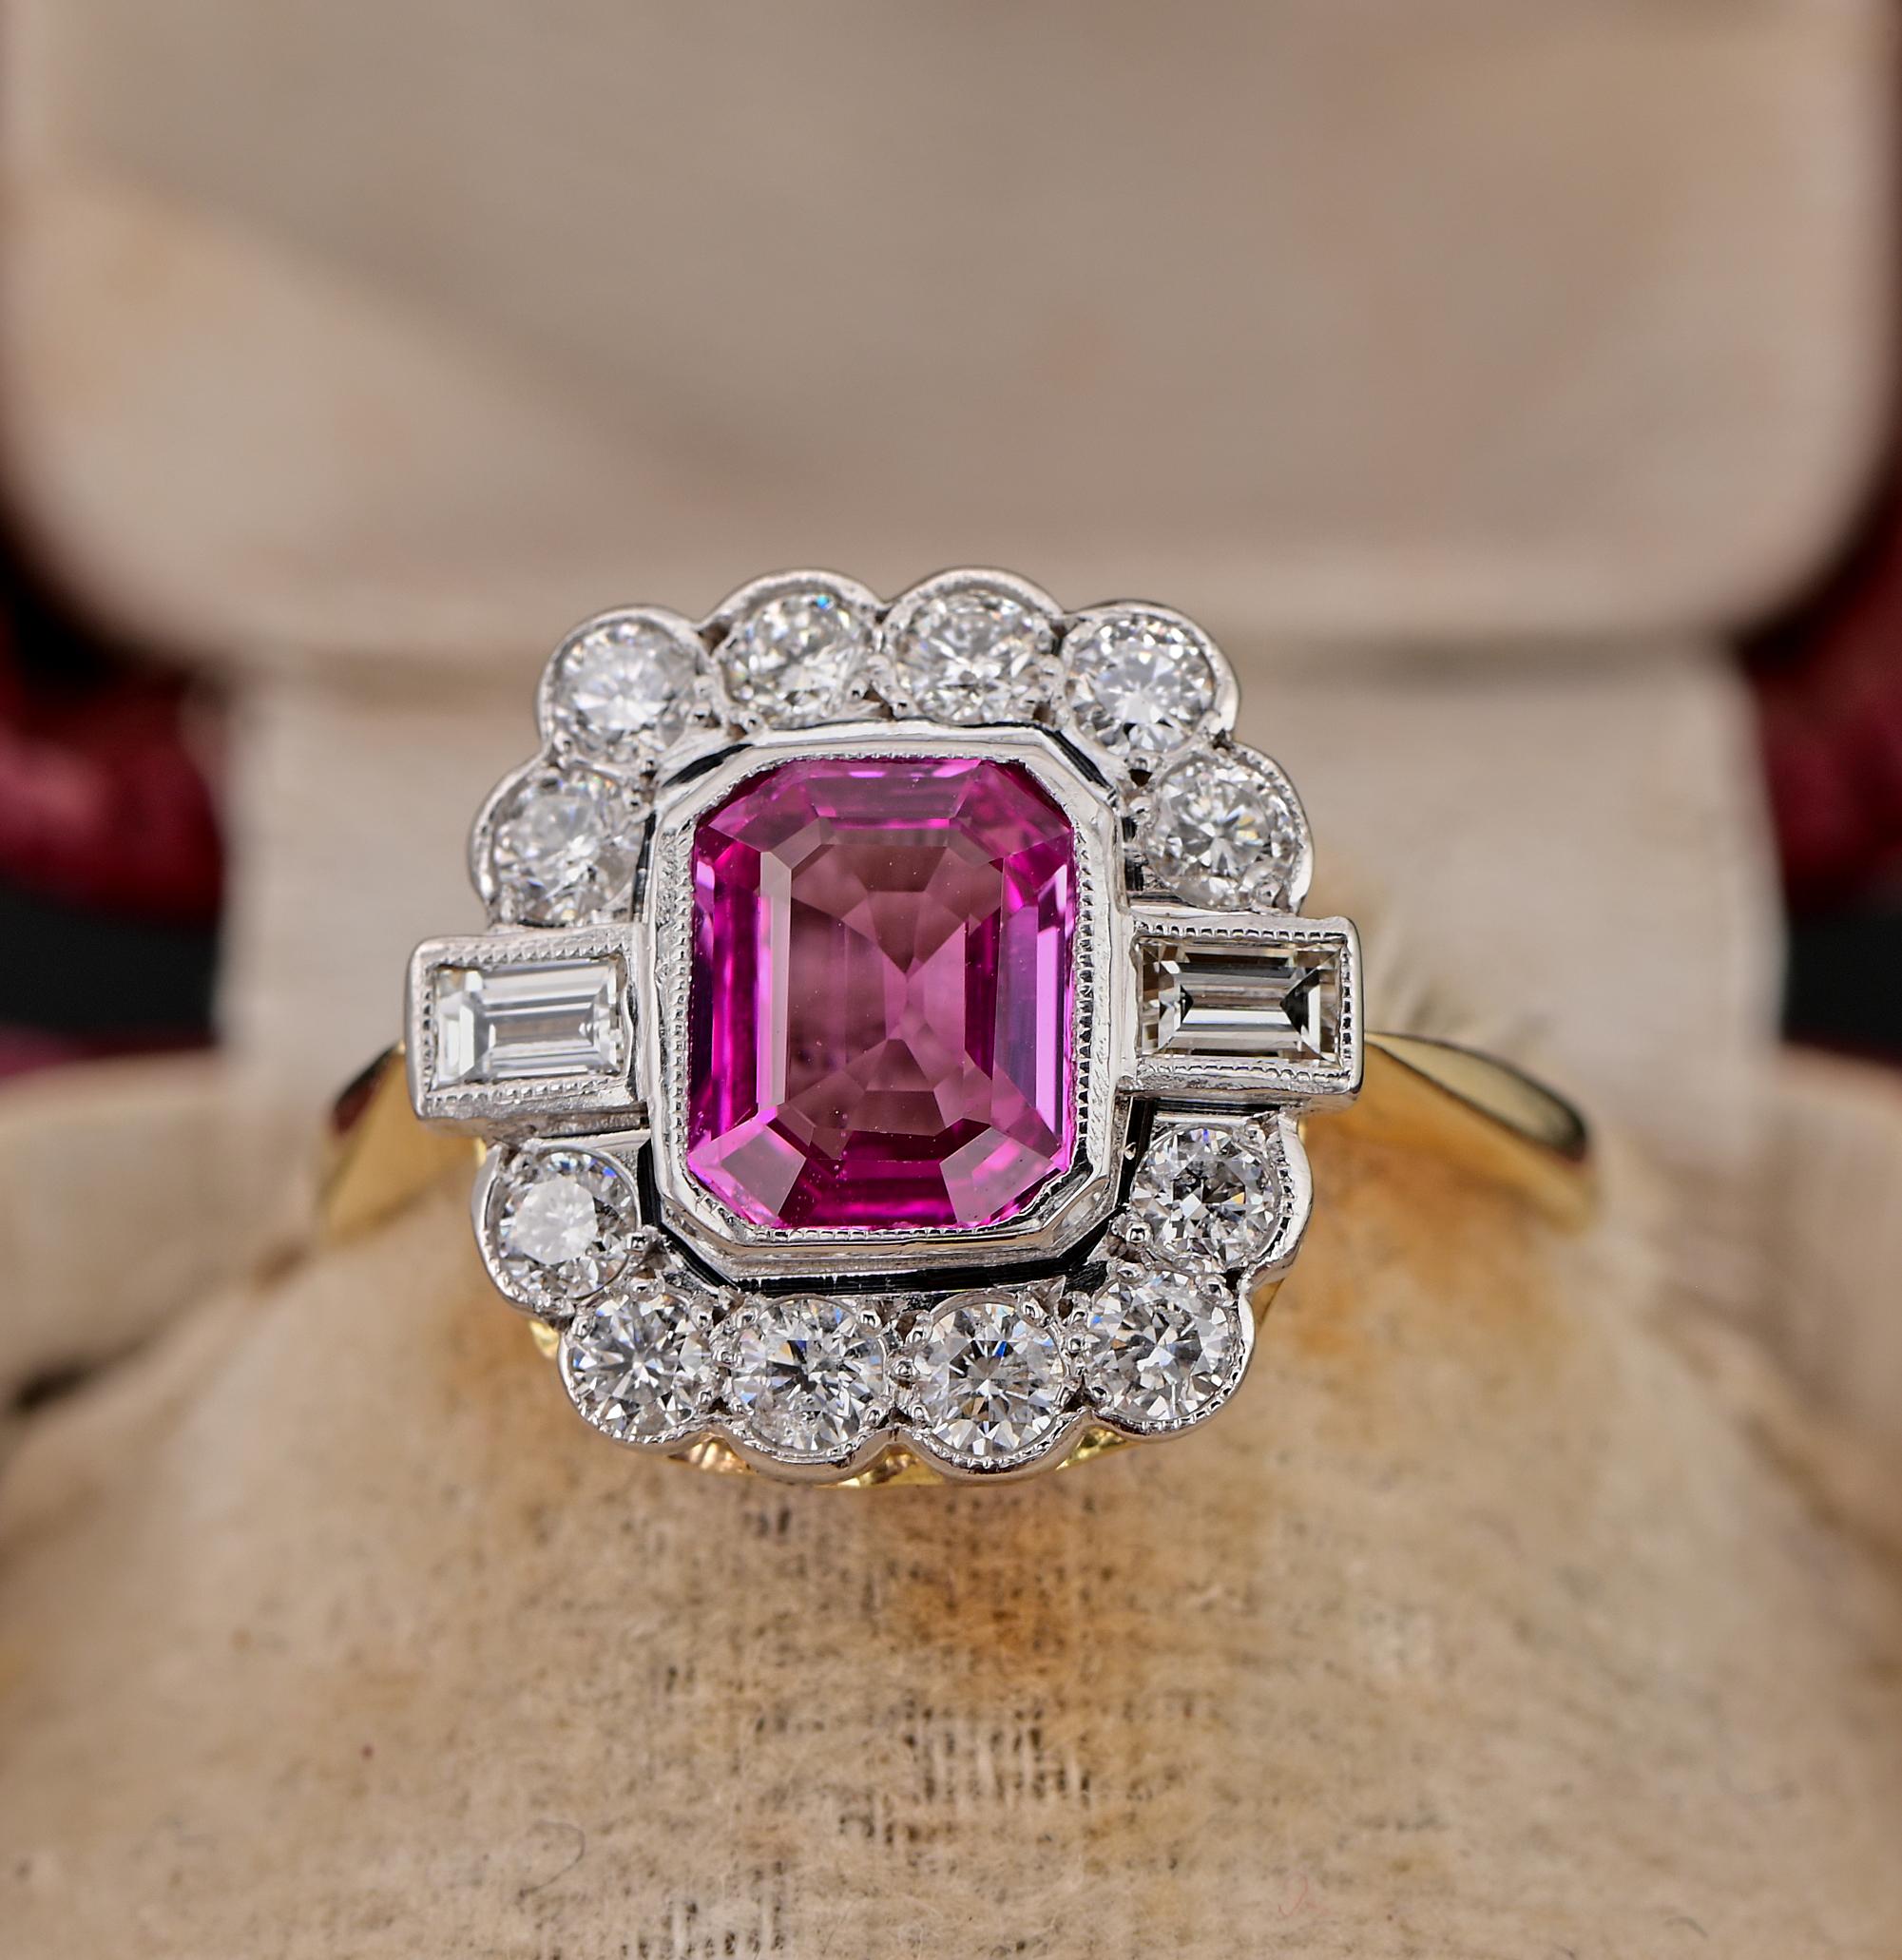 Gorgeous Art Deco Pink Sapphire Diamond ring
Traditional cluster design with a rectangular crown taking inspiration by the main stone
Hand crafted of solid 18 KT gold/ Platinum
Principle Pink Natural is untreated / unheated of known 1.40 Ct. (7.6